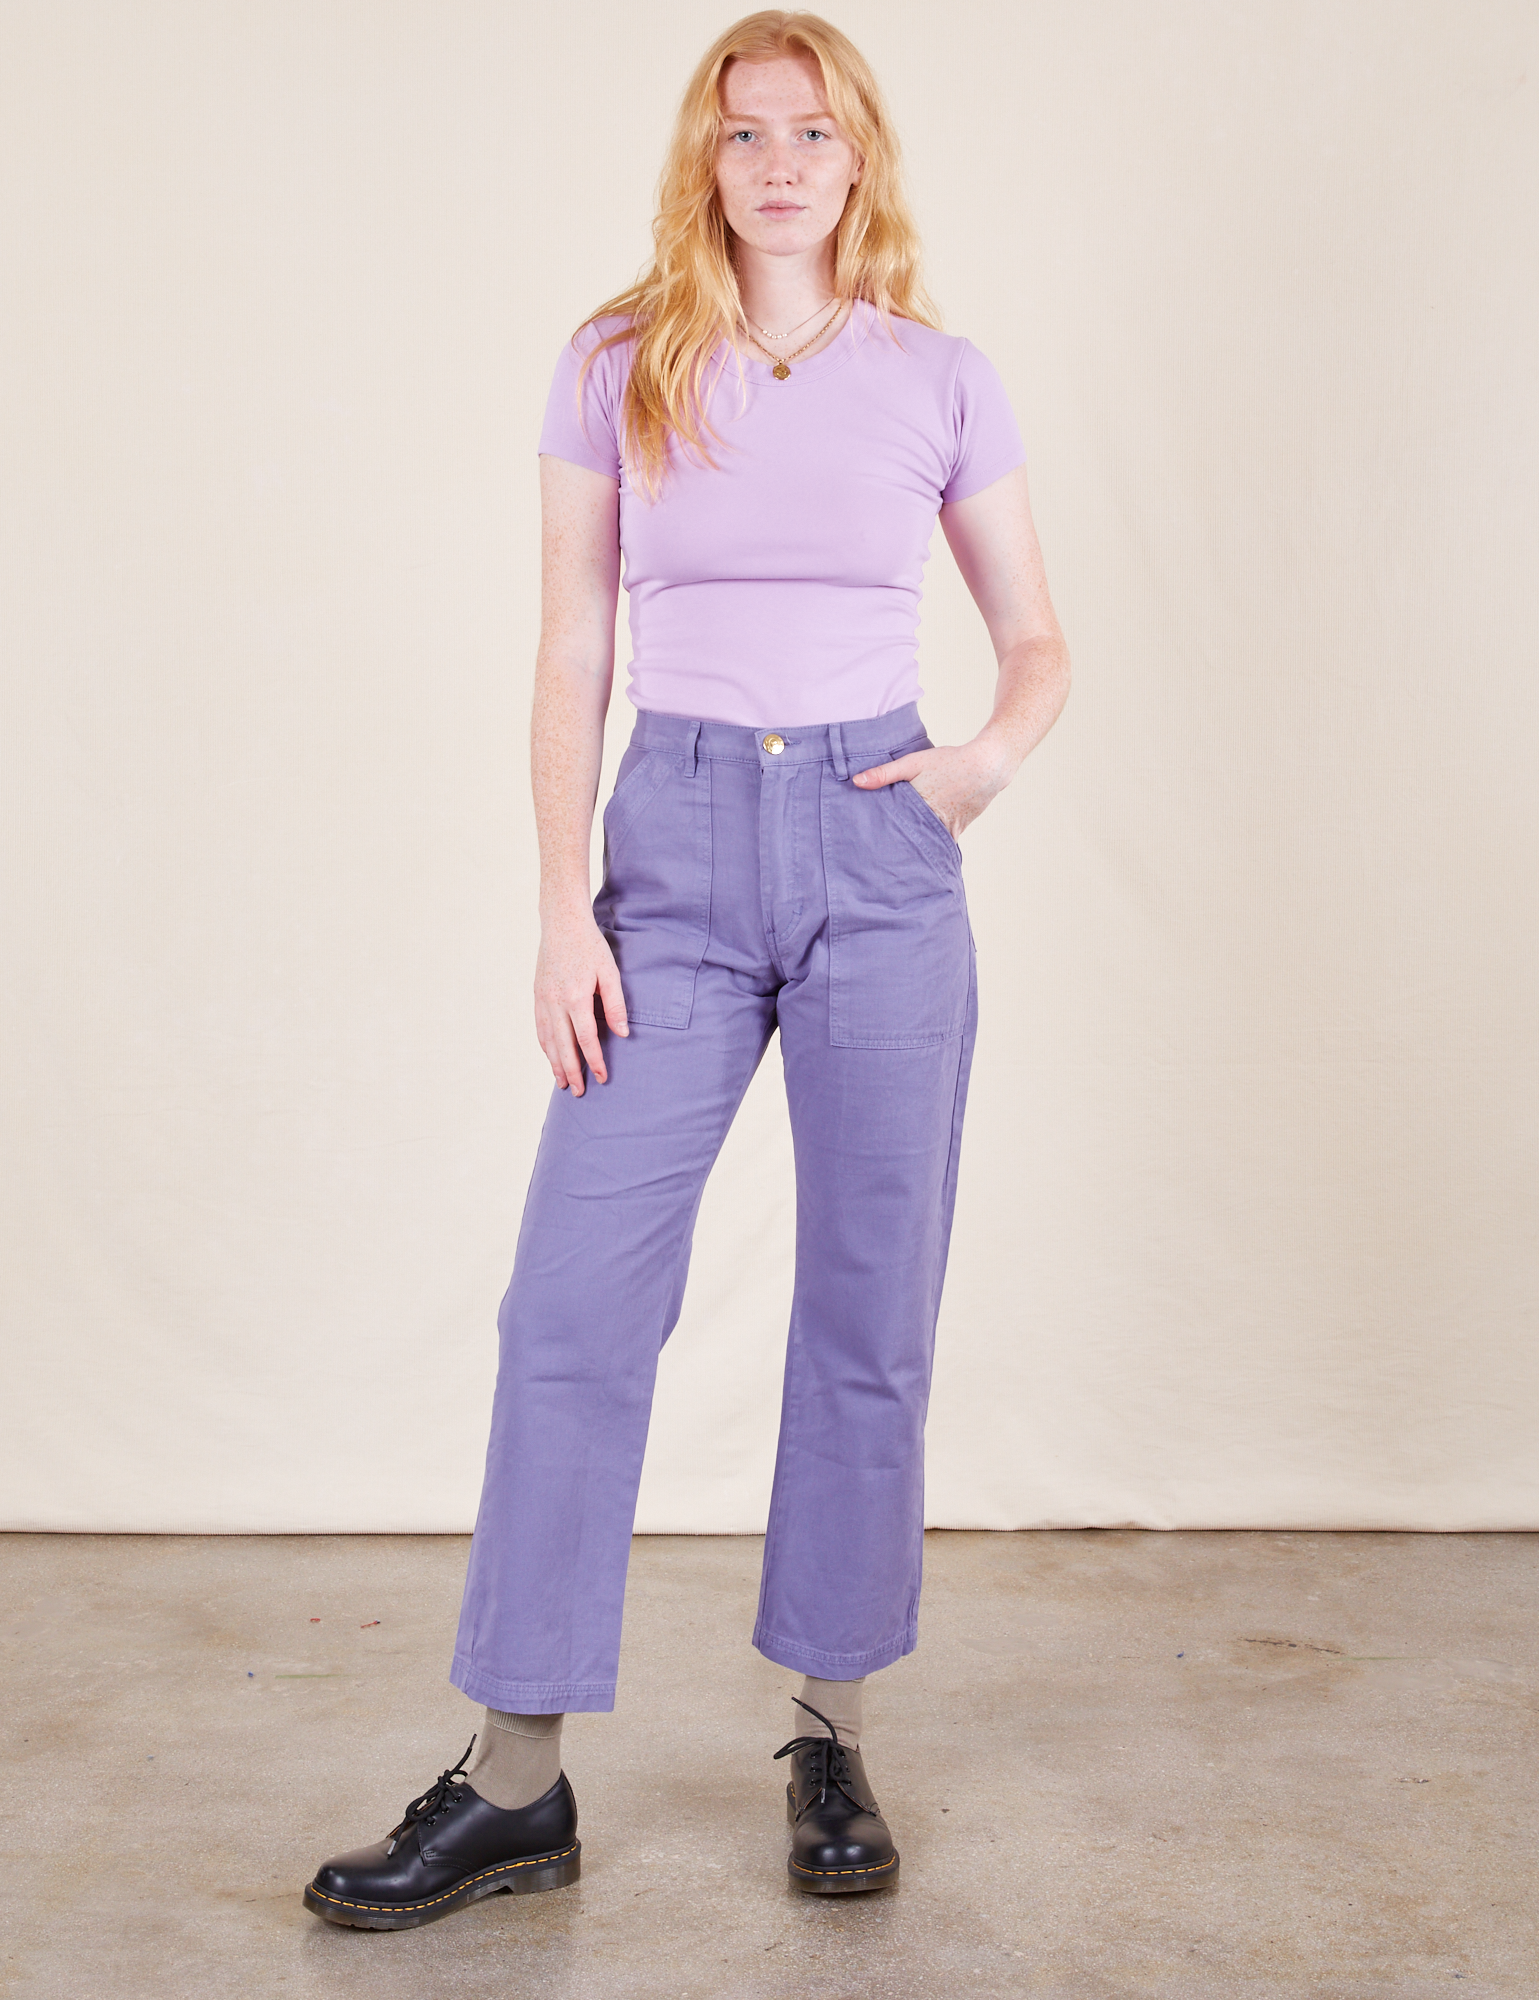 Margaret is 5&#39;11&quot; and wearing XXS Work Pants in Faded Grape and a Baby Tee